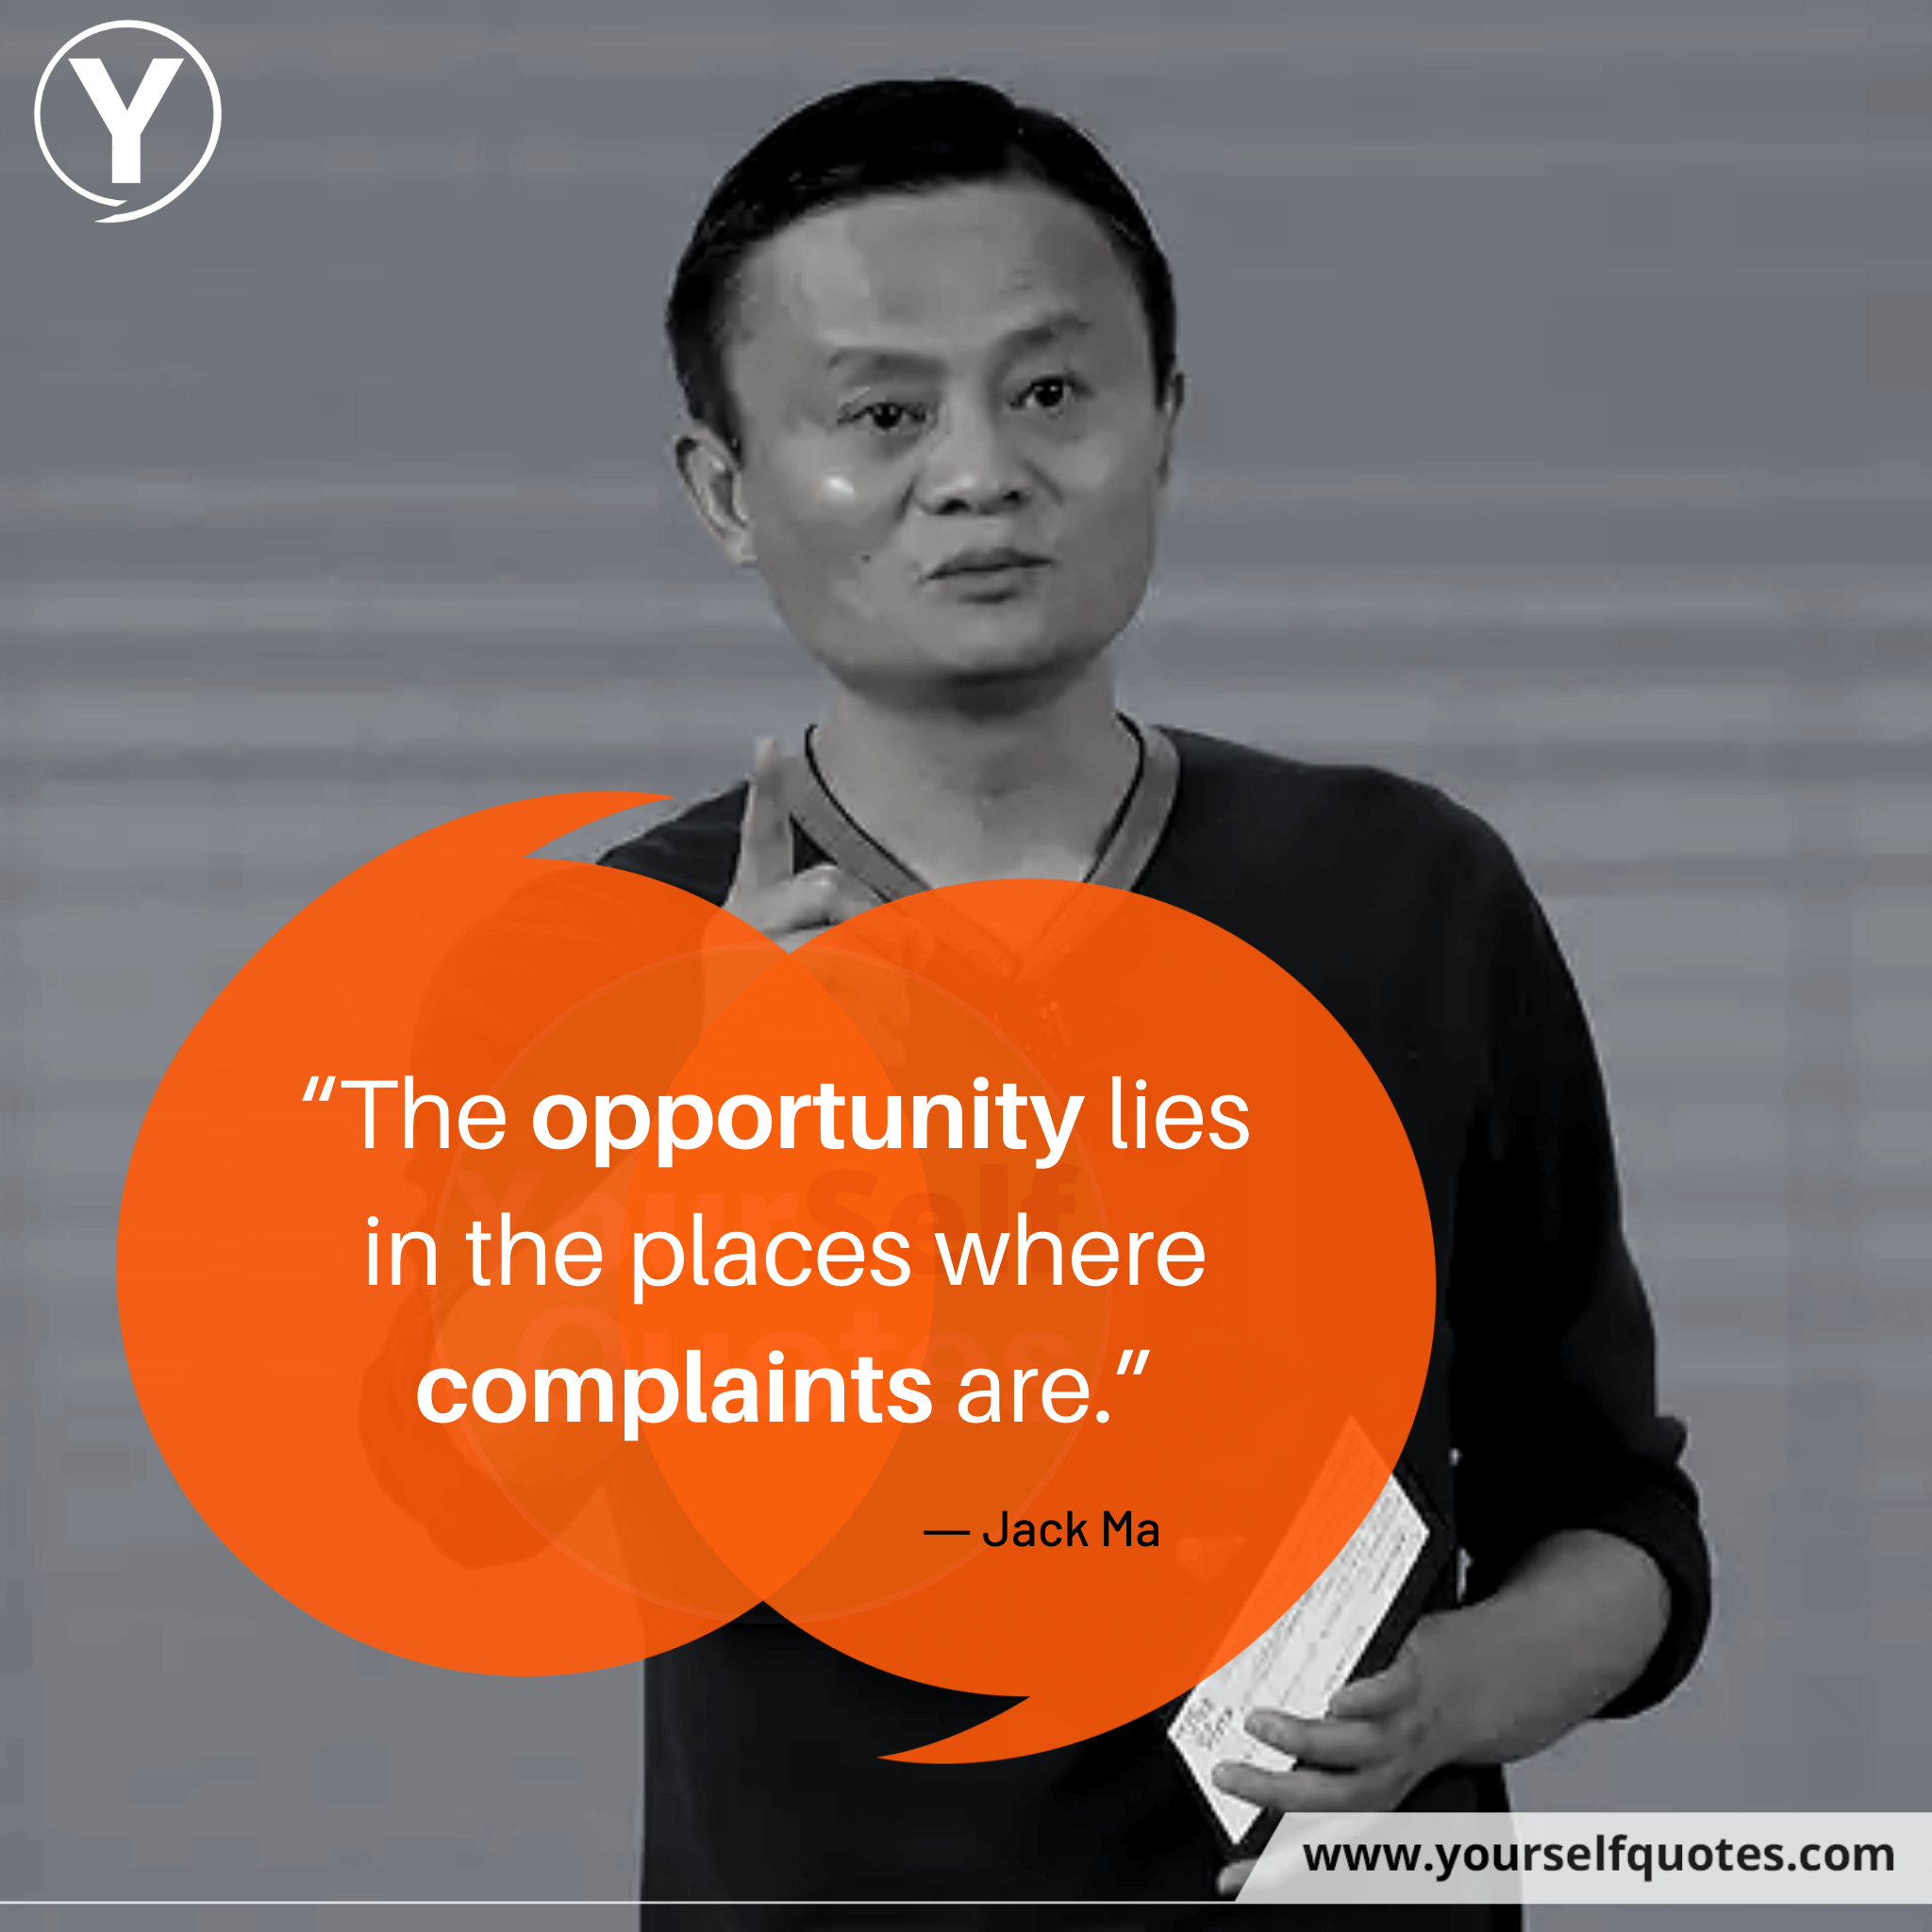 Jack Ma Opportunity Quotes